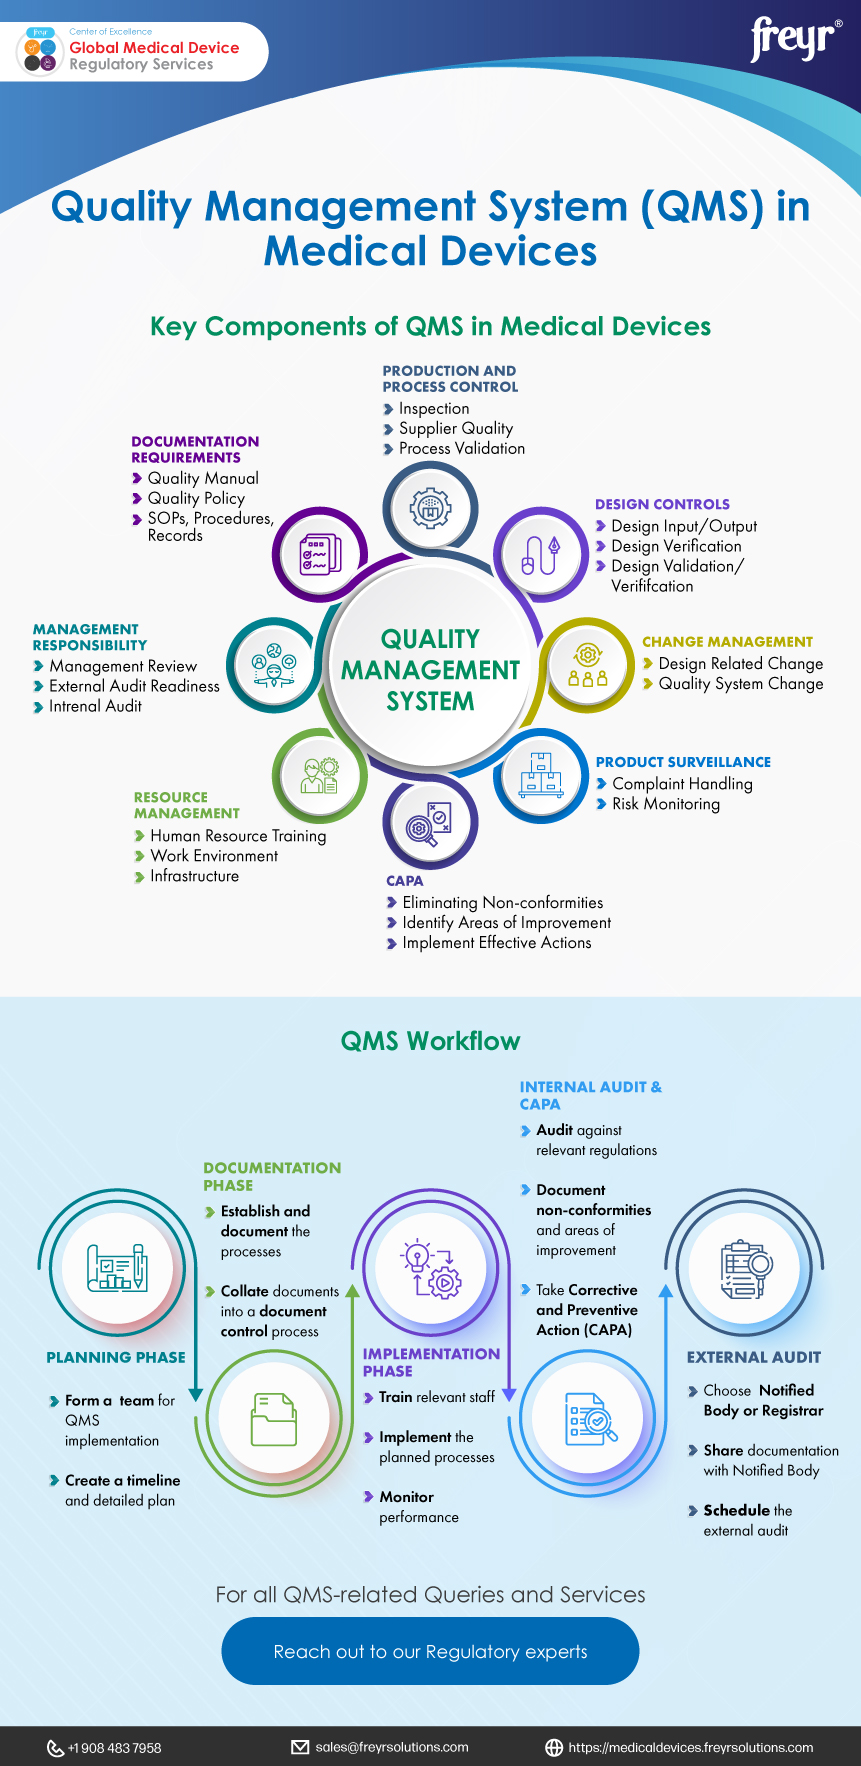 Quality Management System (QMS) in Medical Devices